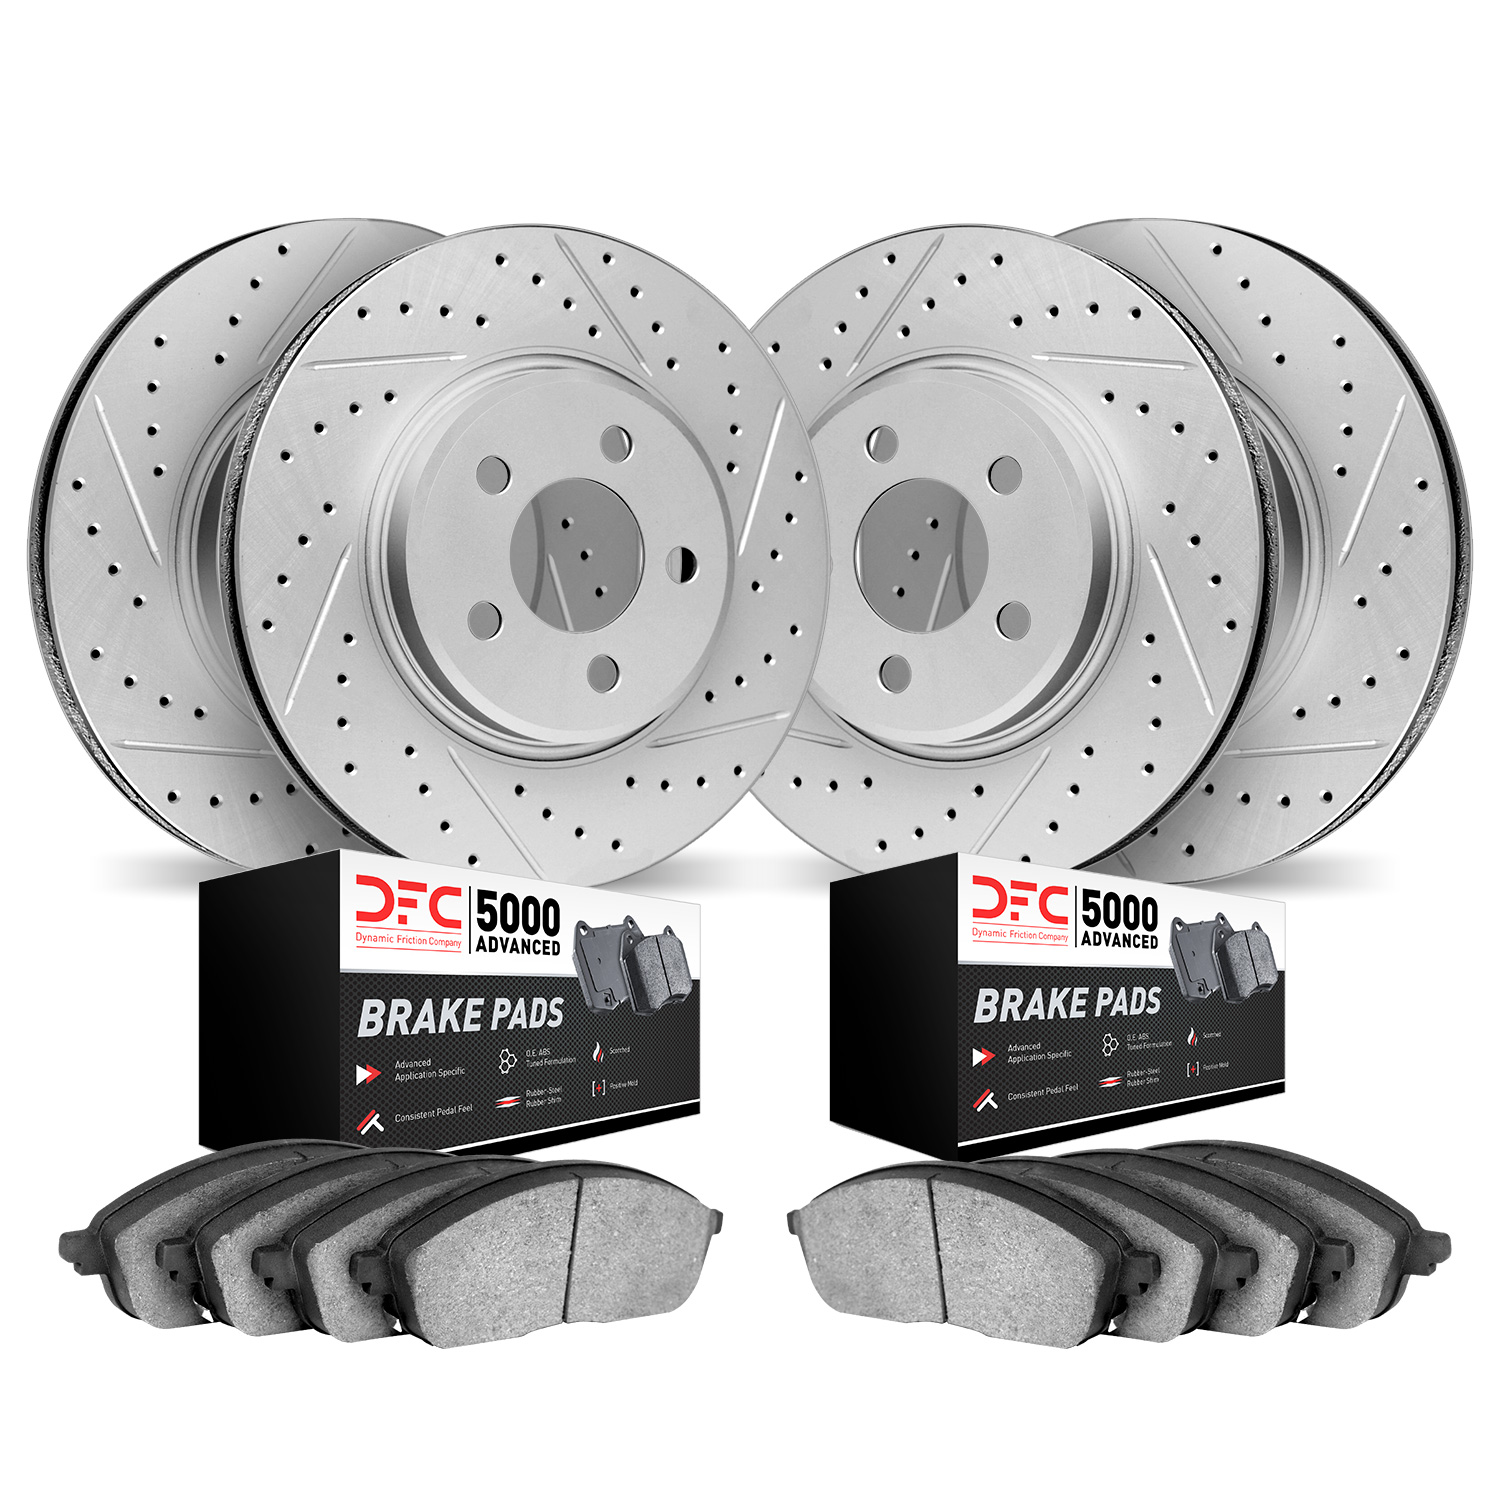 2504-20018 Geoperformance Drilled/Slotted Rotors w/5000 Advanced Brake Pads Kit, 2017-2020 Multiple Makes/Models, Position: Fron